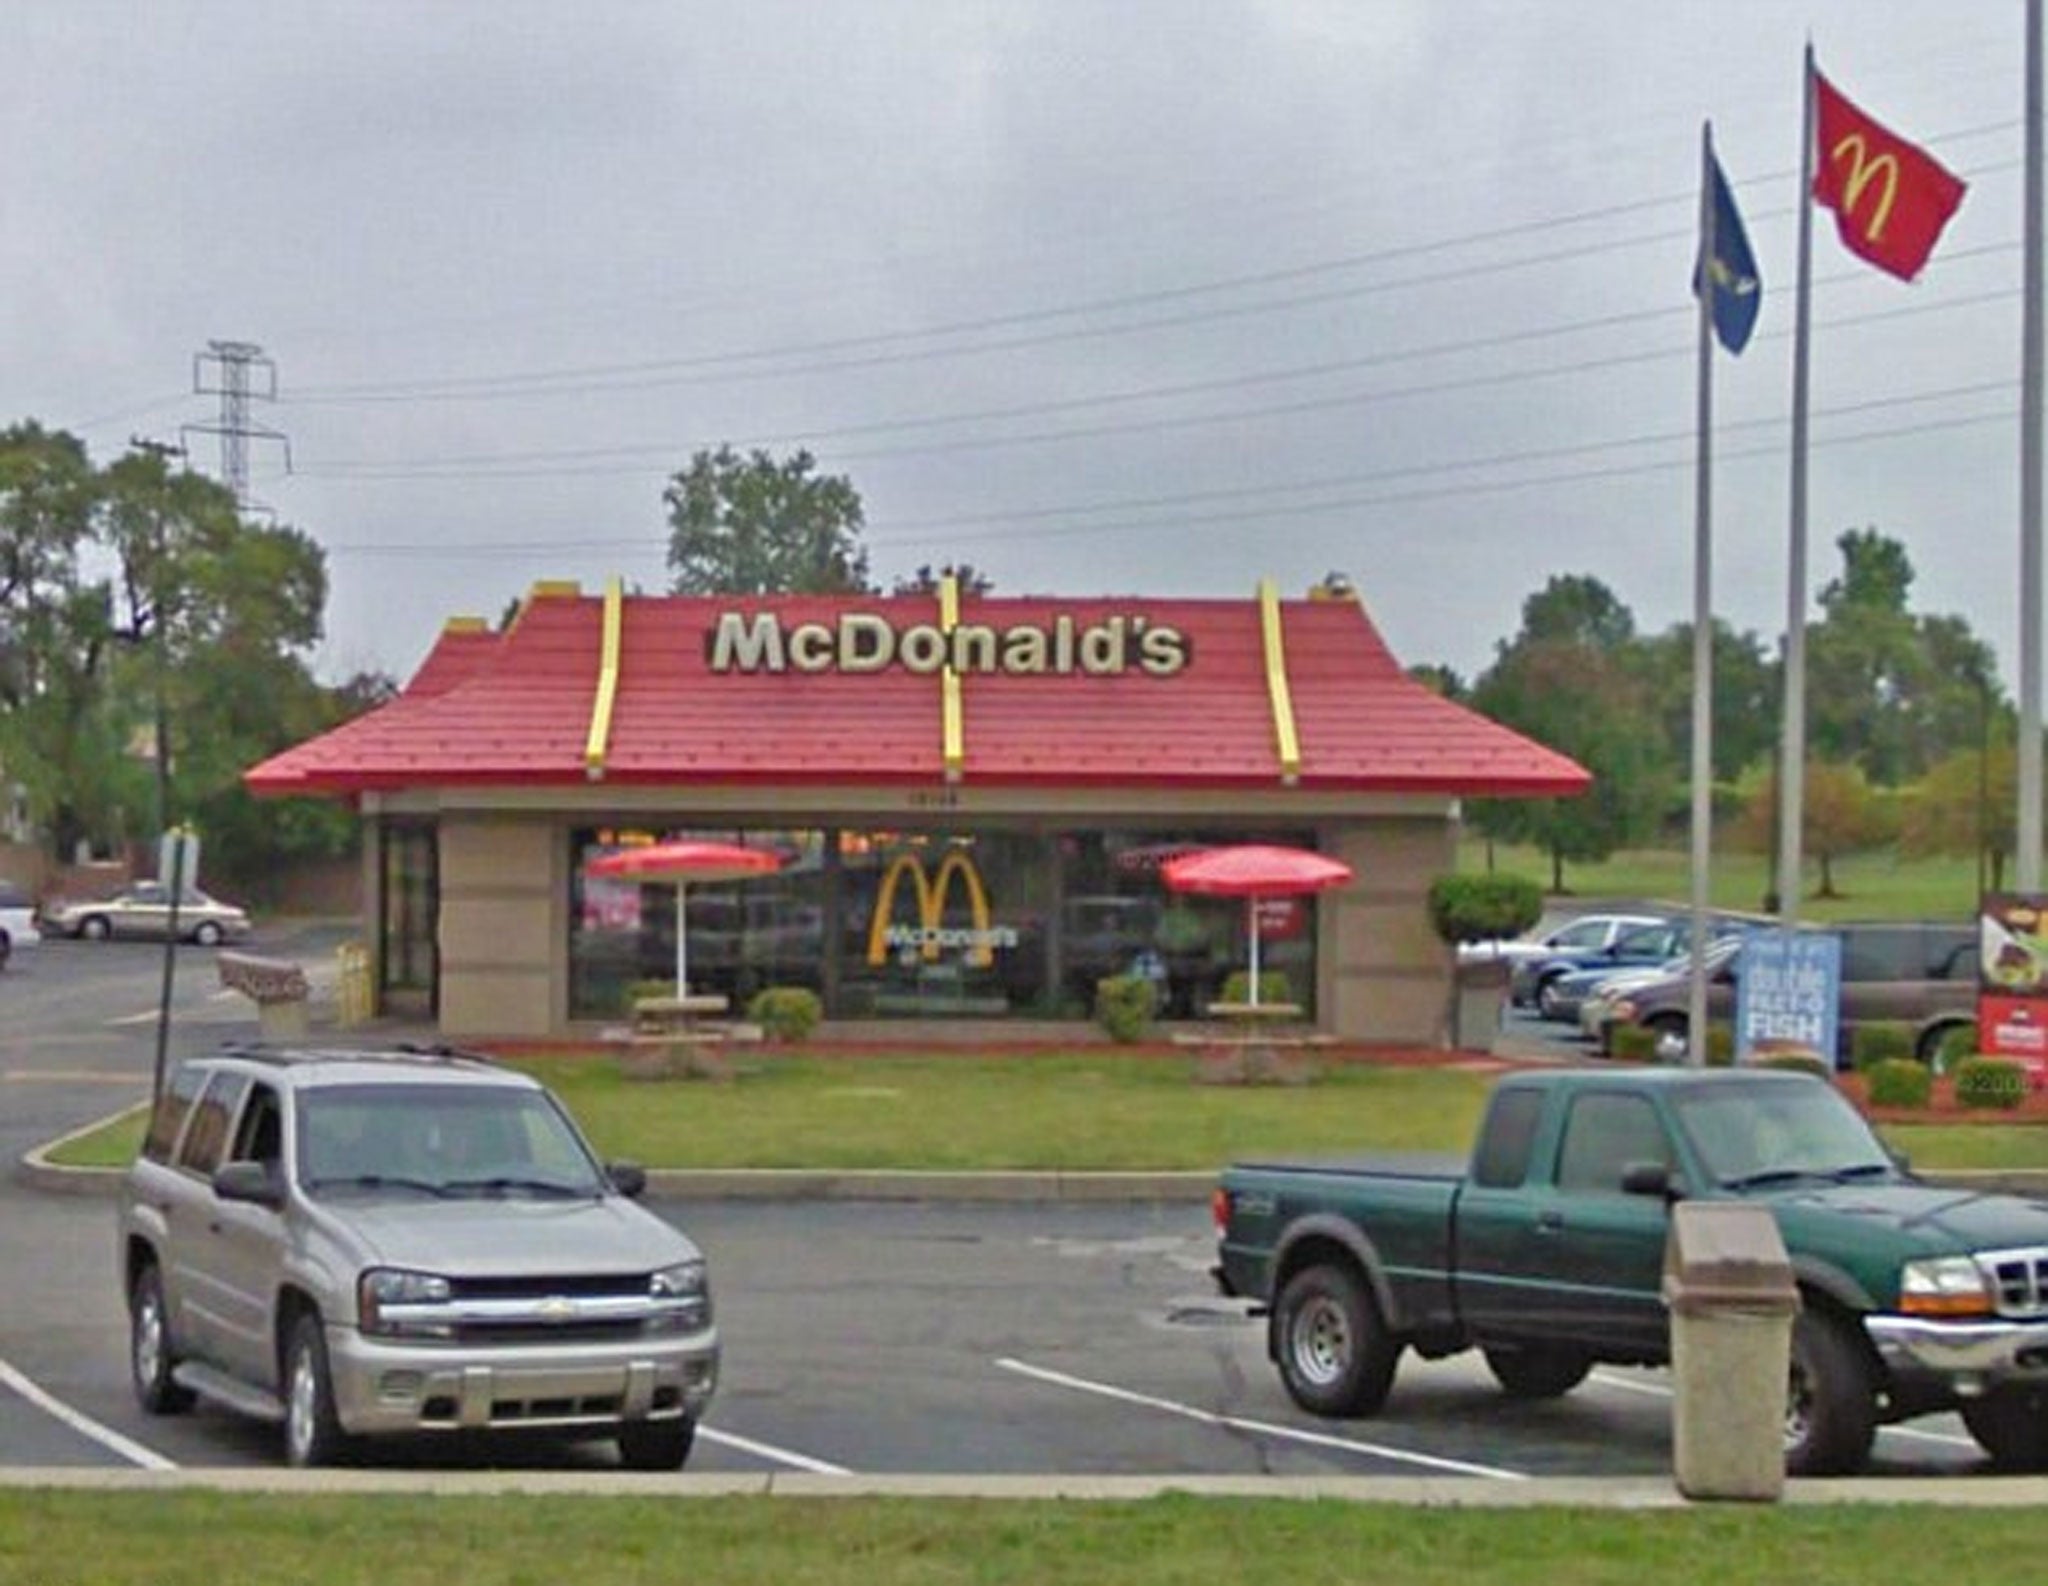 The McDonald's branch on Ford Road, Dearborn in Detroit, Michigan.